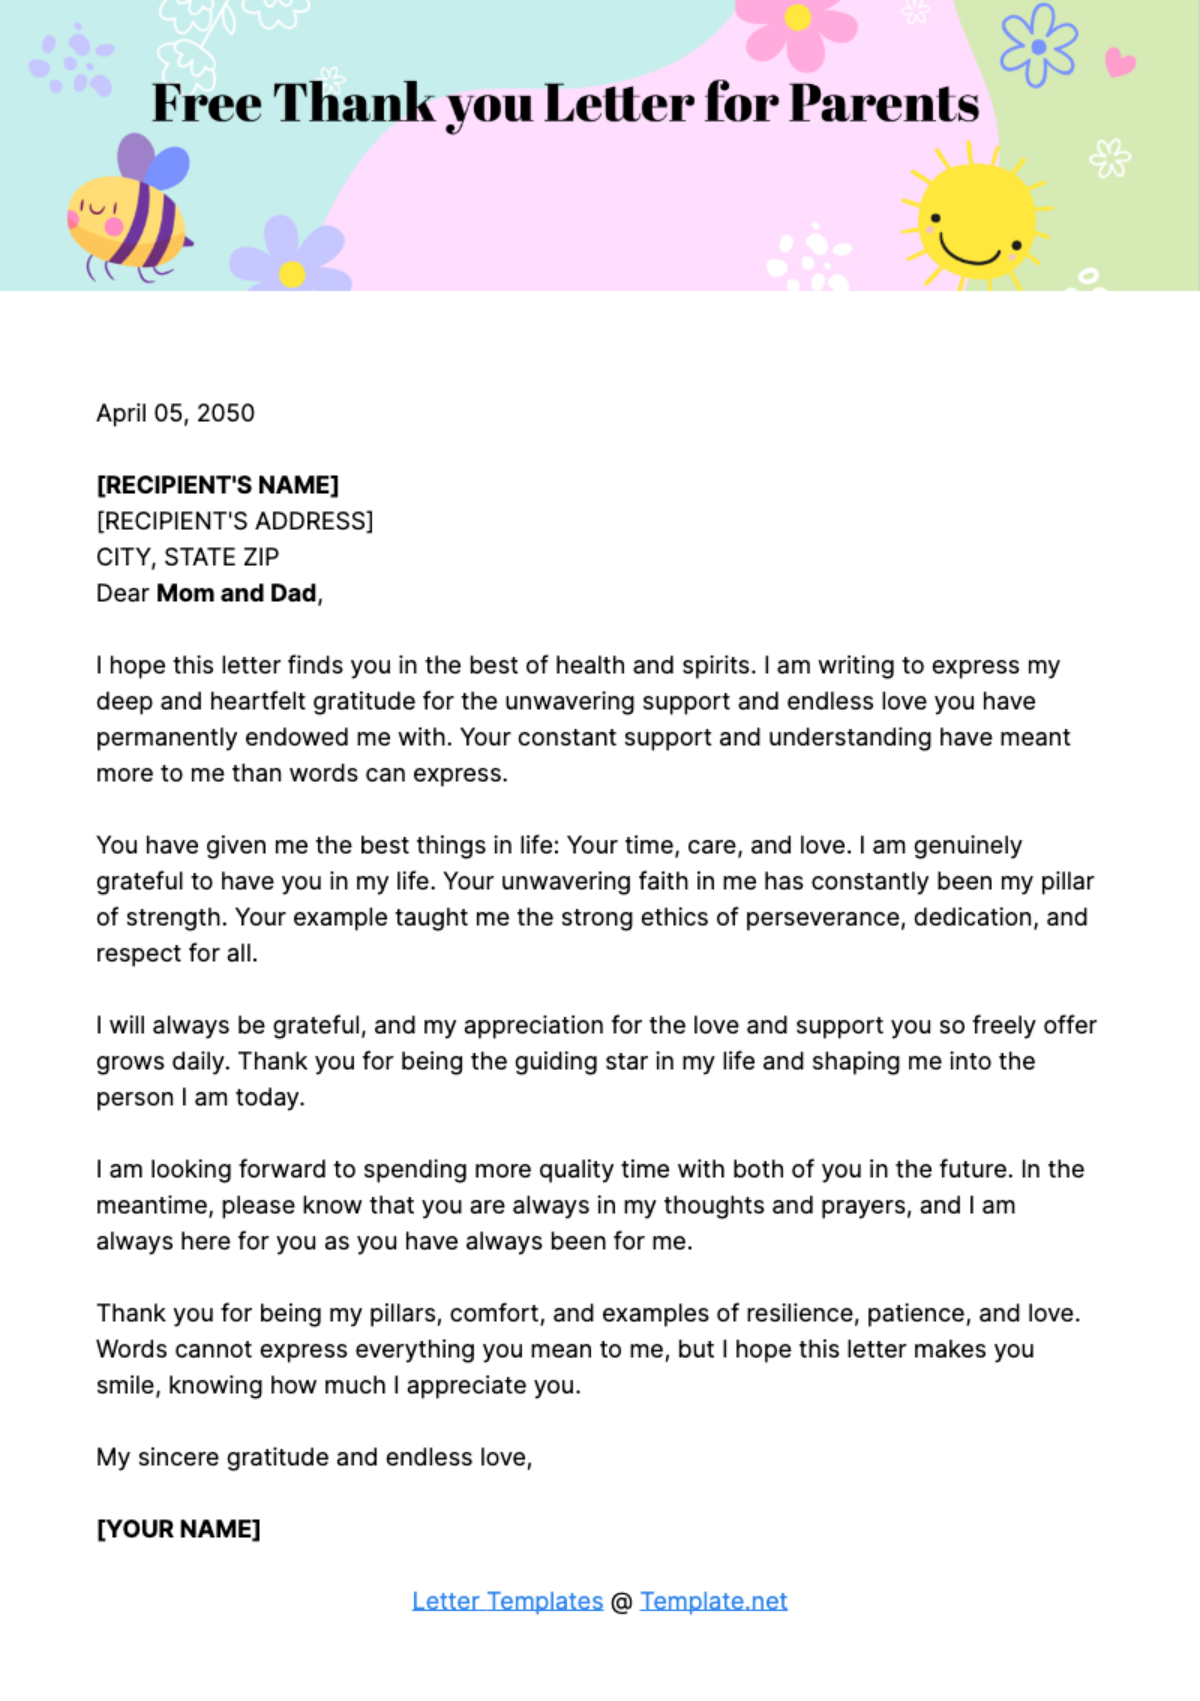 Free Thank you Letter for Parents Template